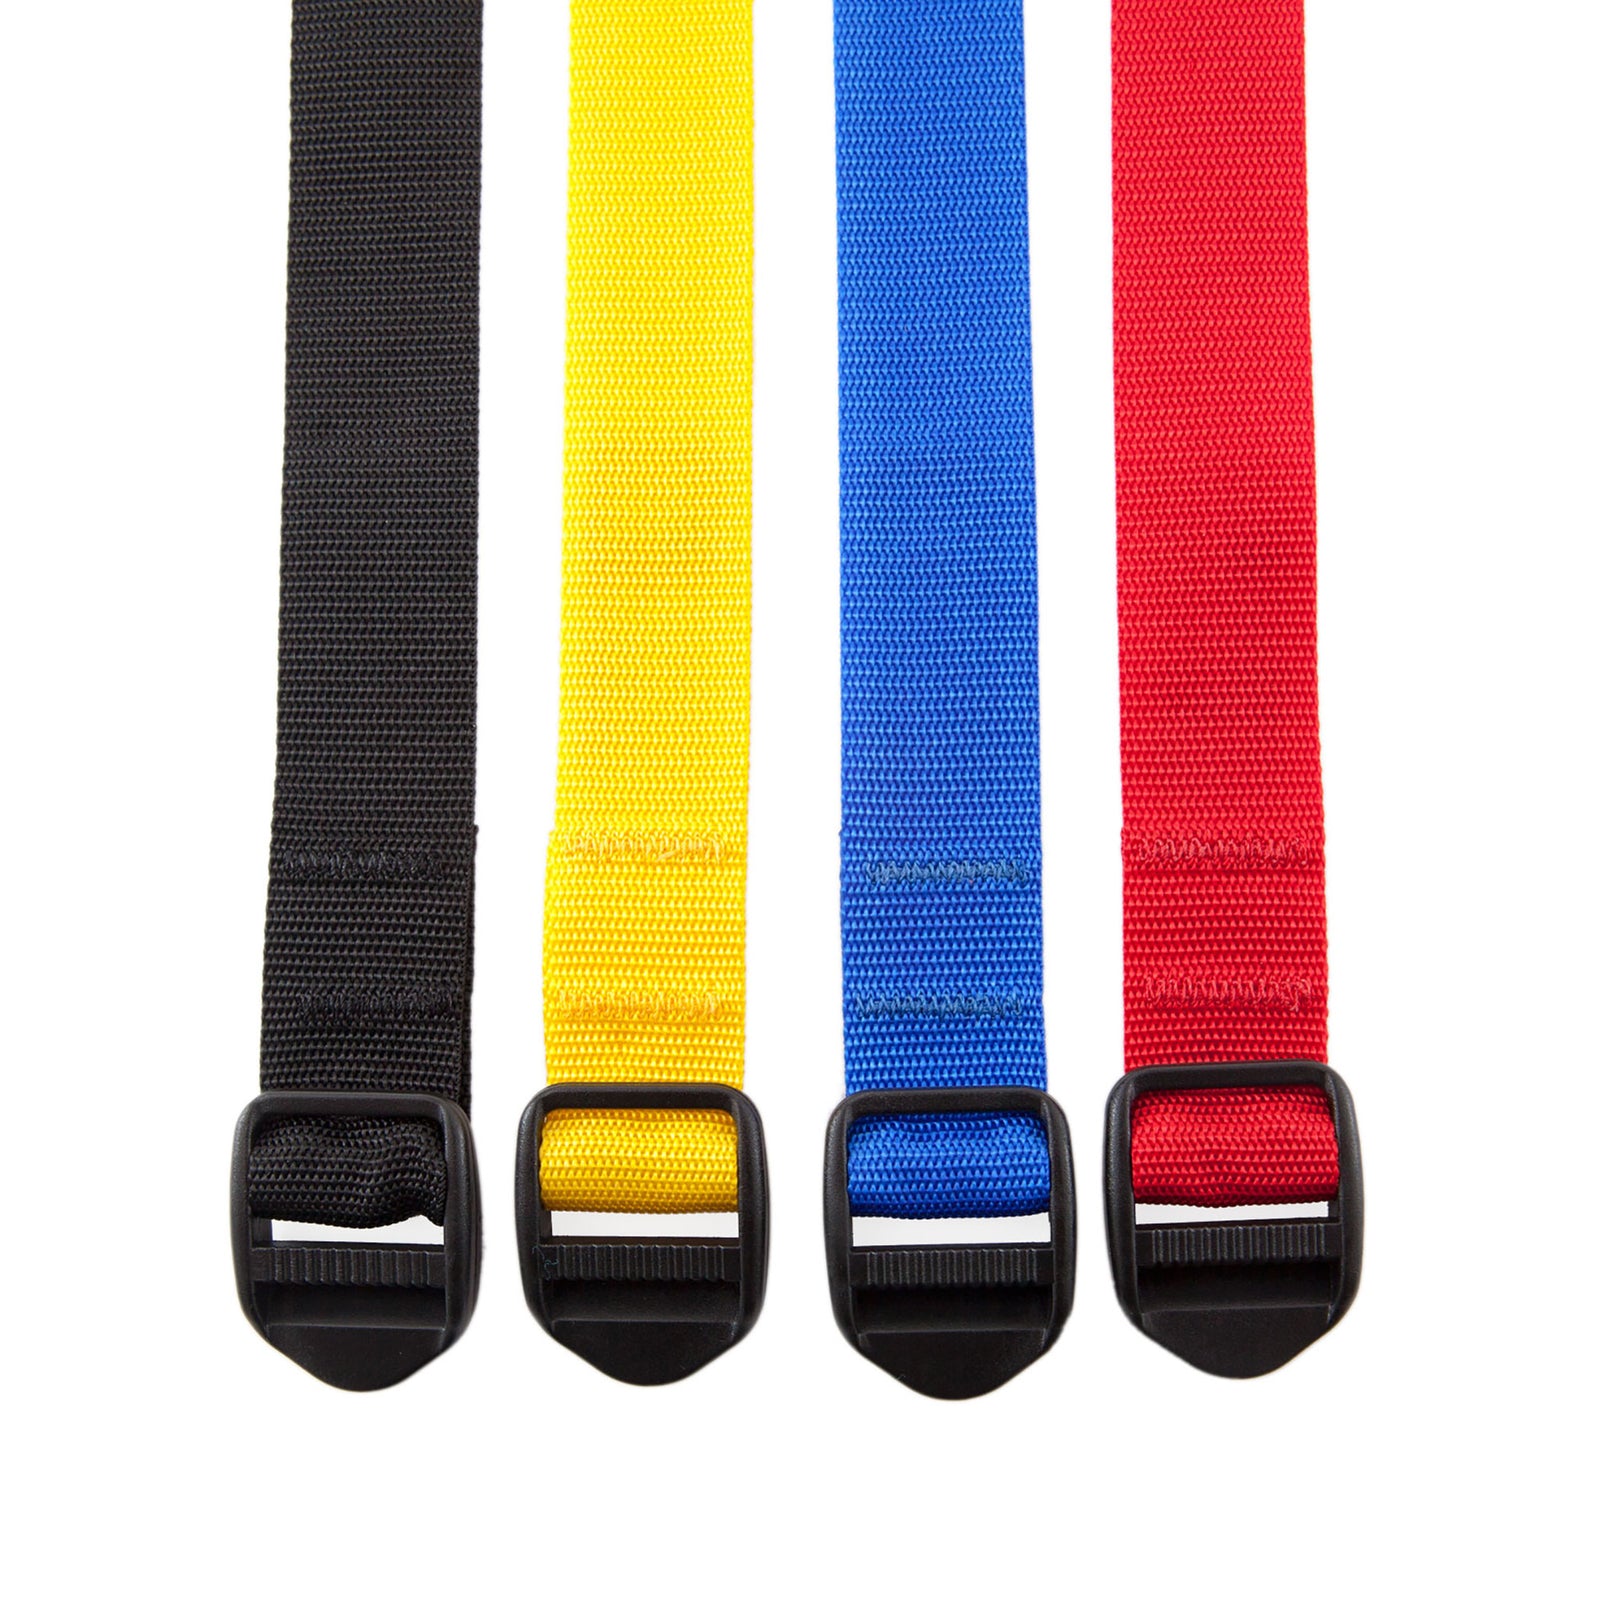 General product shot showing all accessory straps next to one another- black, yellow, blue, red.